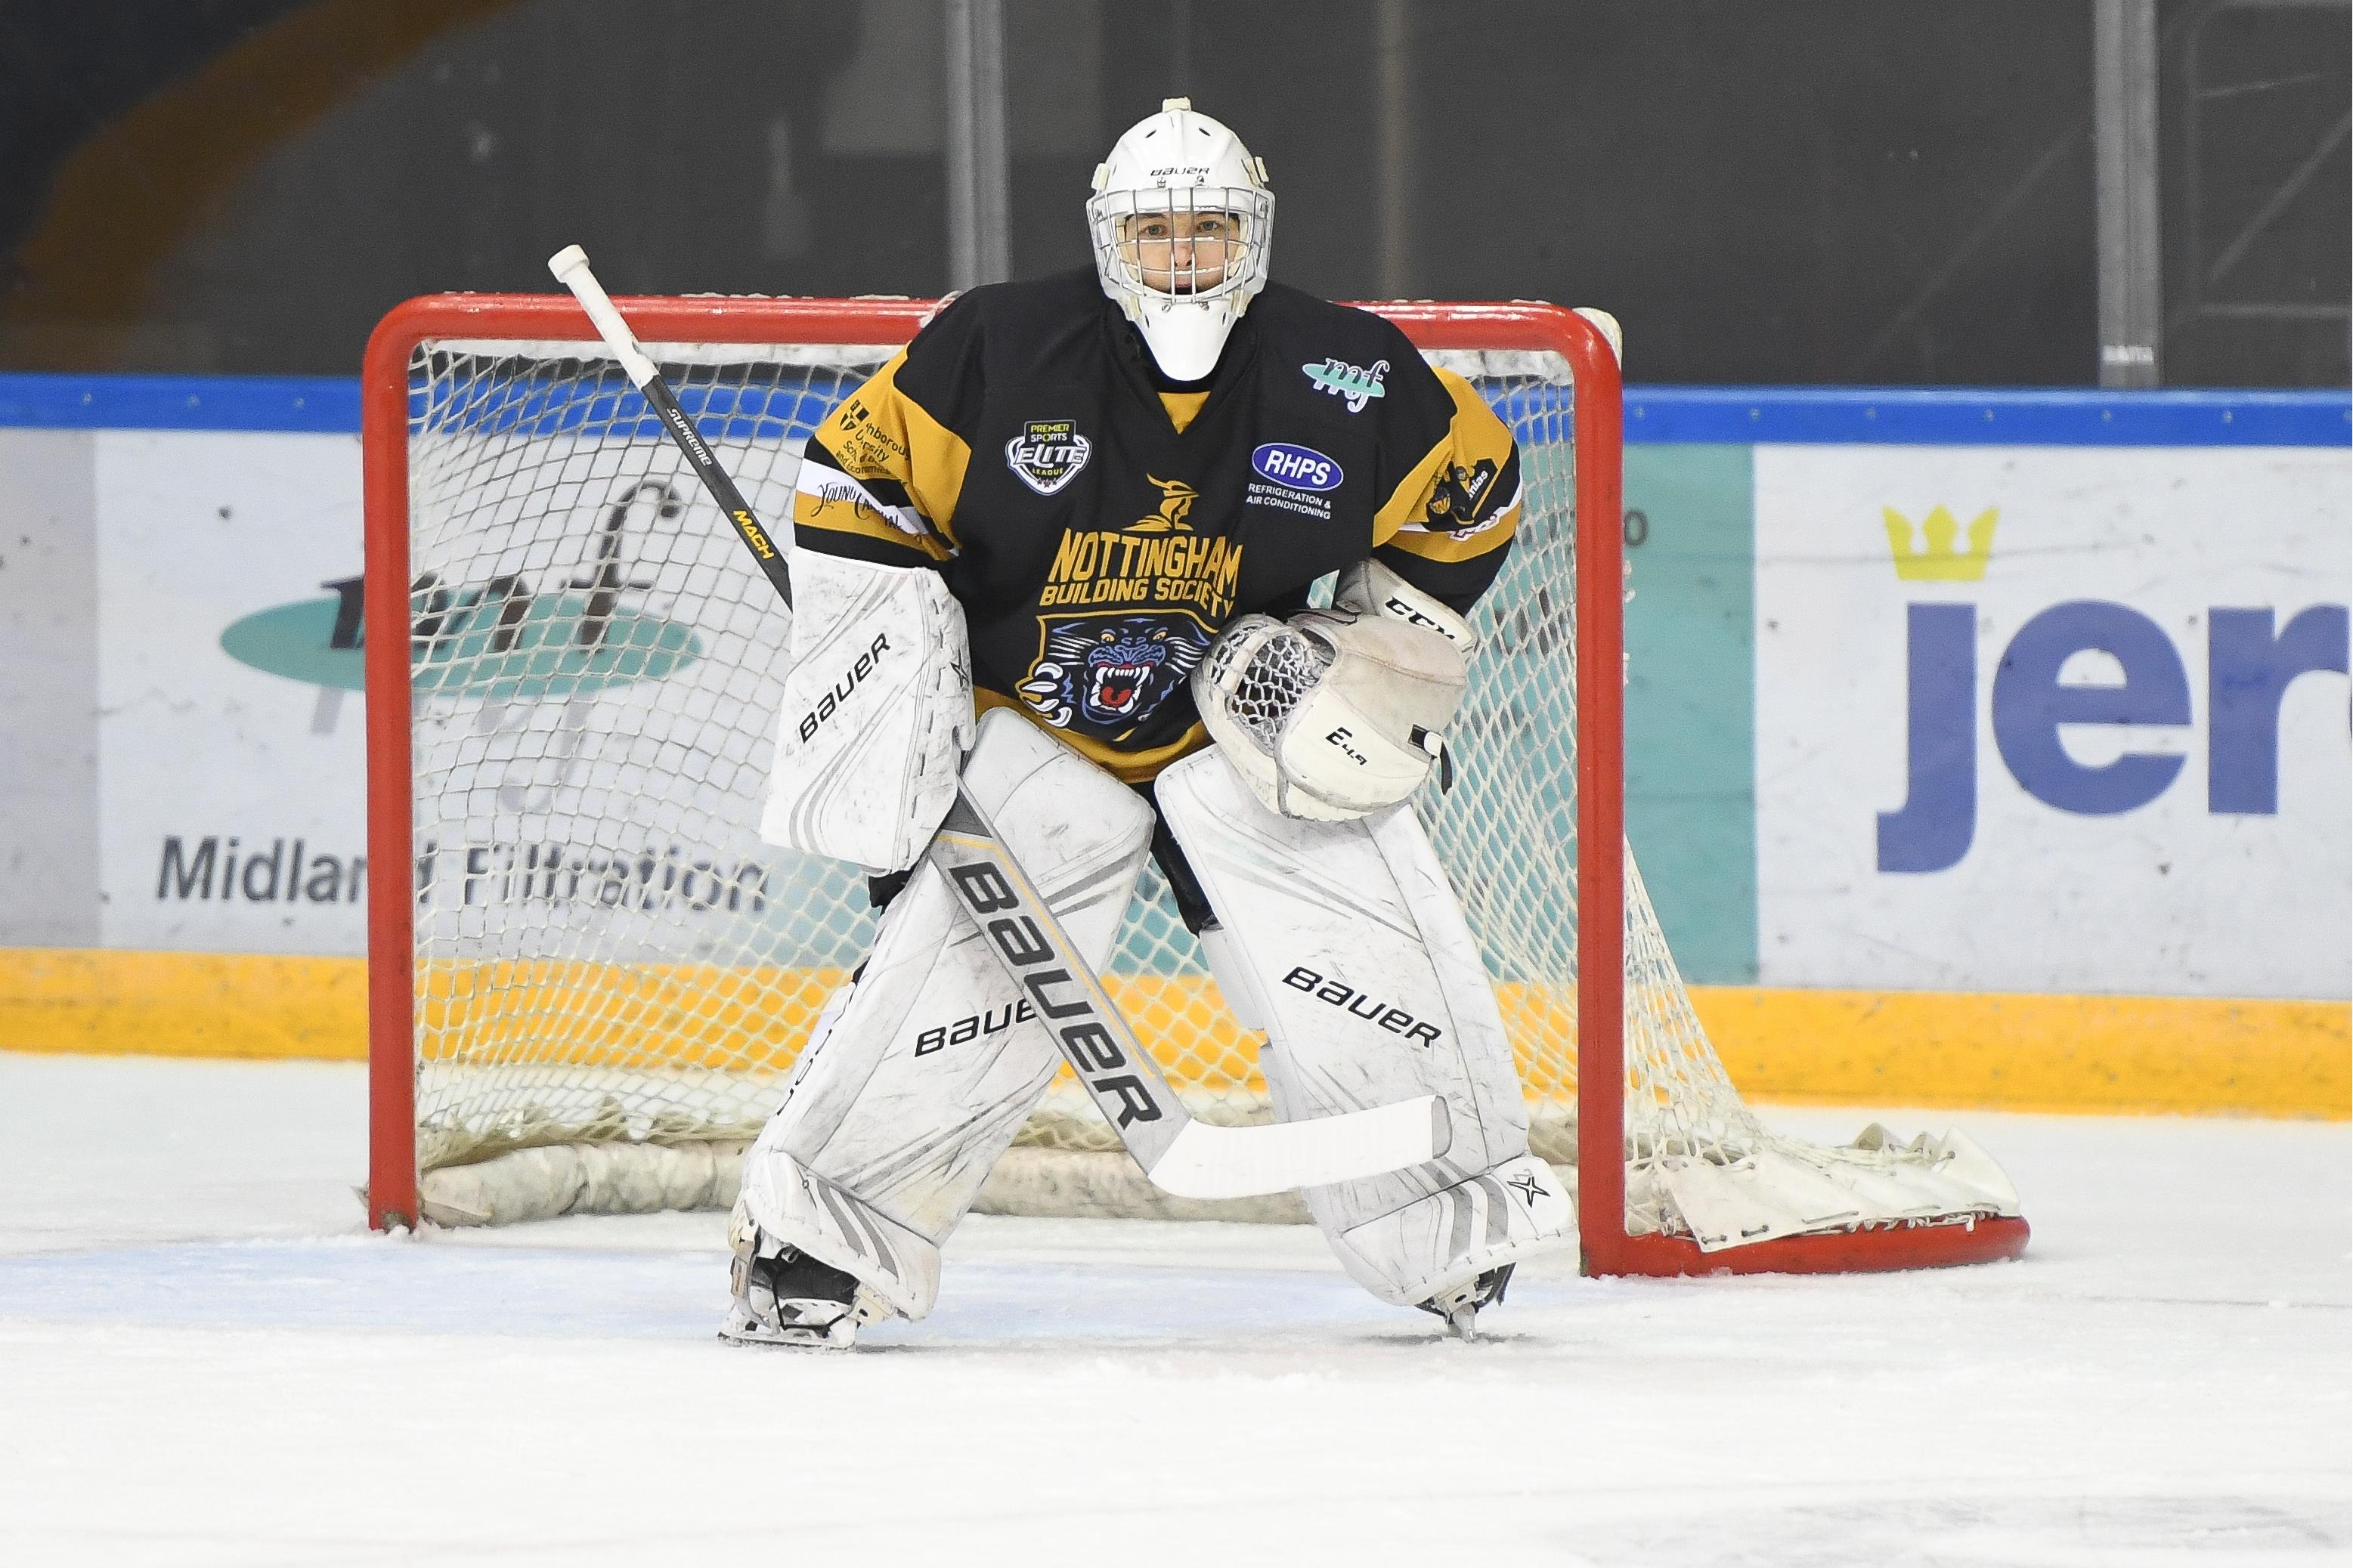 CHALLENGE CUP: PANTHERS 5-4 STORM Top Image